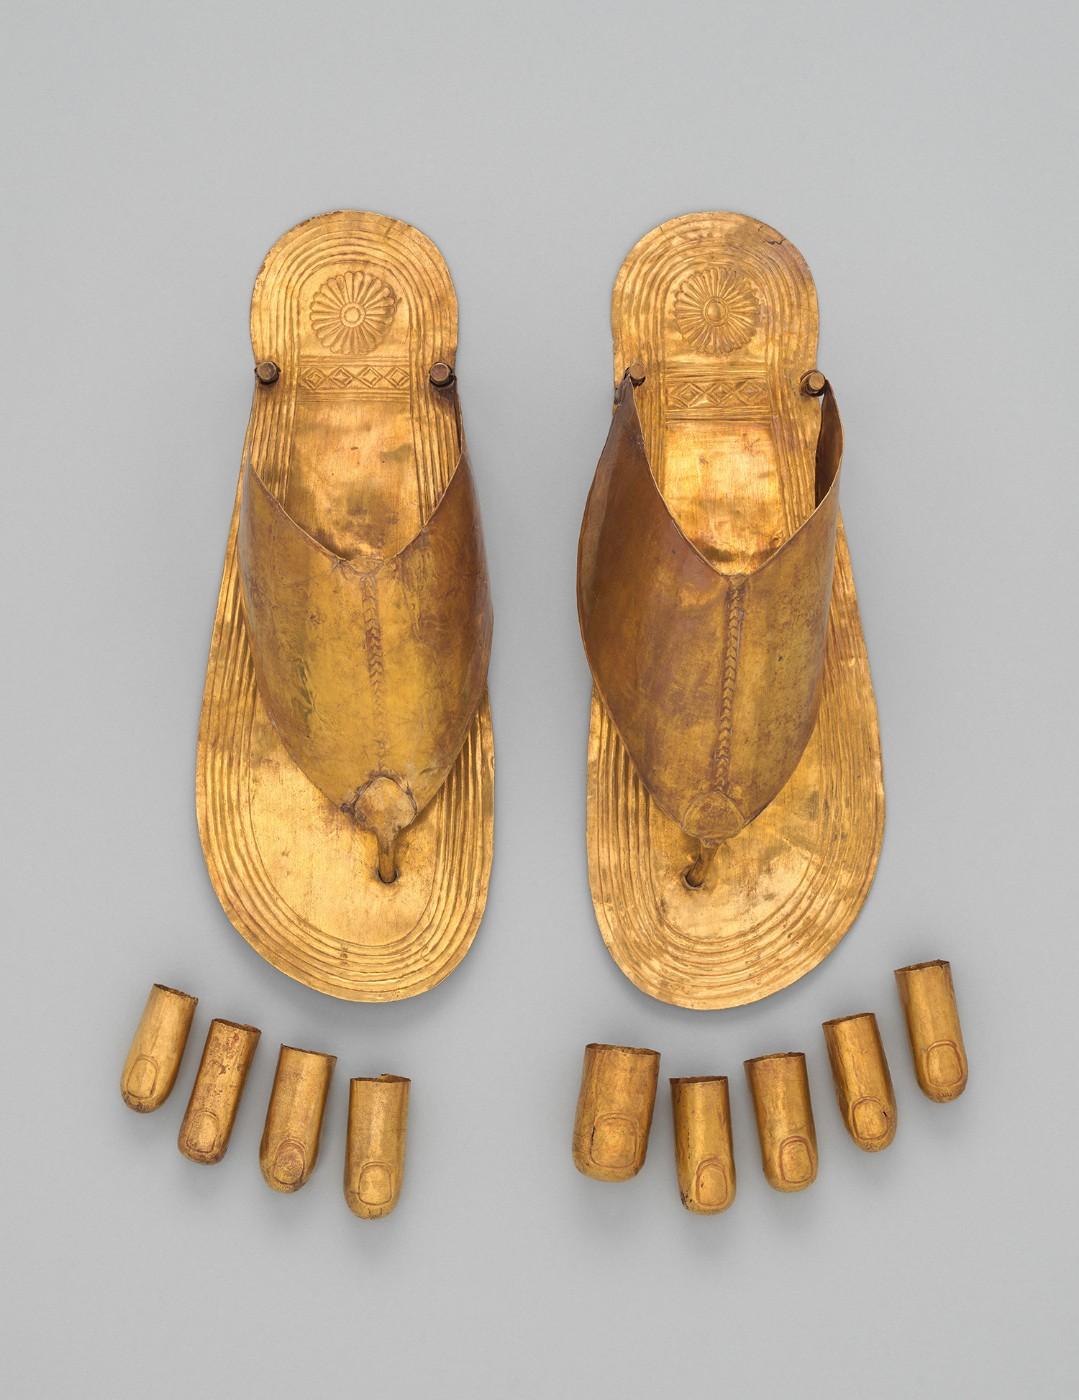 Gold Sandals and Toe Stalls. Egyptian, reign of Thutmose III, ca. 1479–1425 B.C.